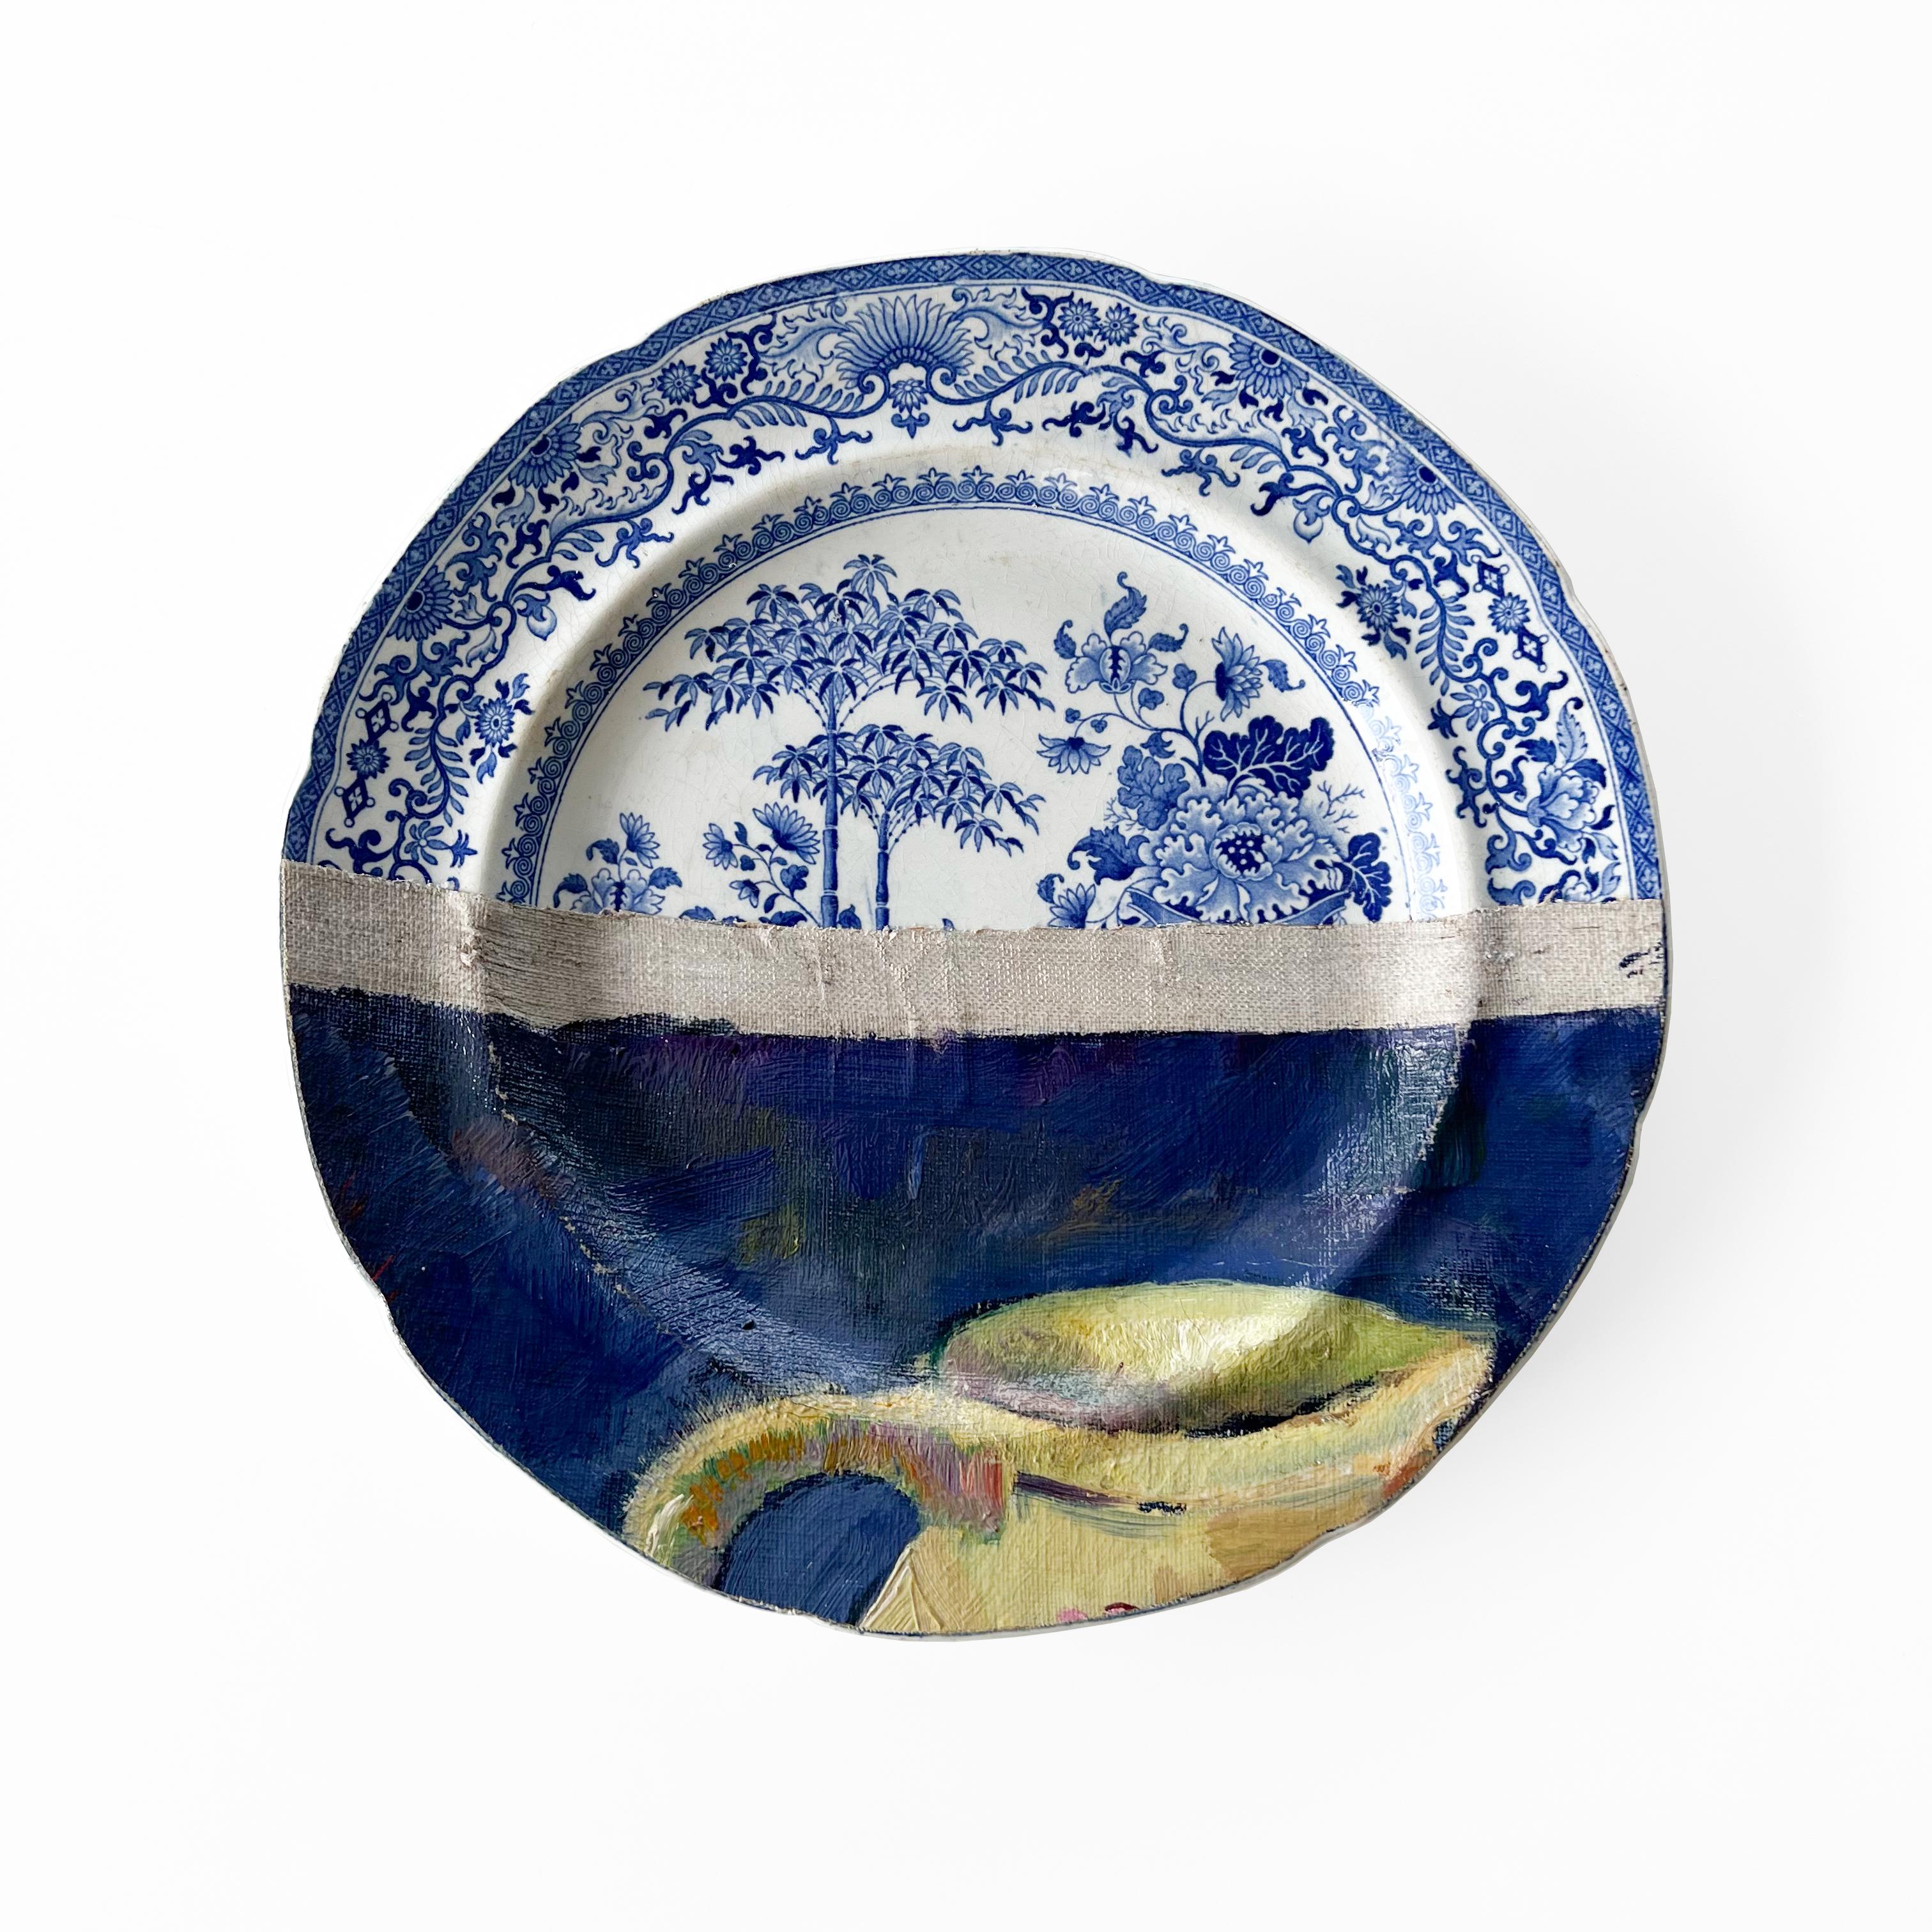 “The Red Necklace” includes two 19th C. Blue & White plates (one is British and one is French) and a big late 19th C. hand painted Chinese plate.
The painting features a still life with a red necklace on a light blue plate, with a yellow ceramic